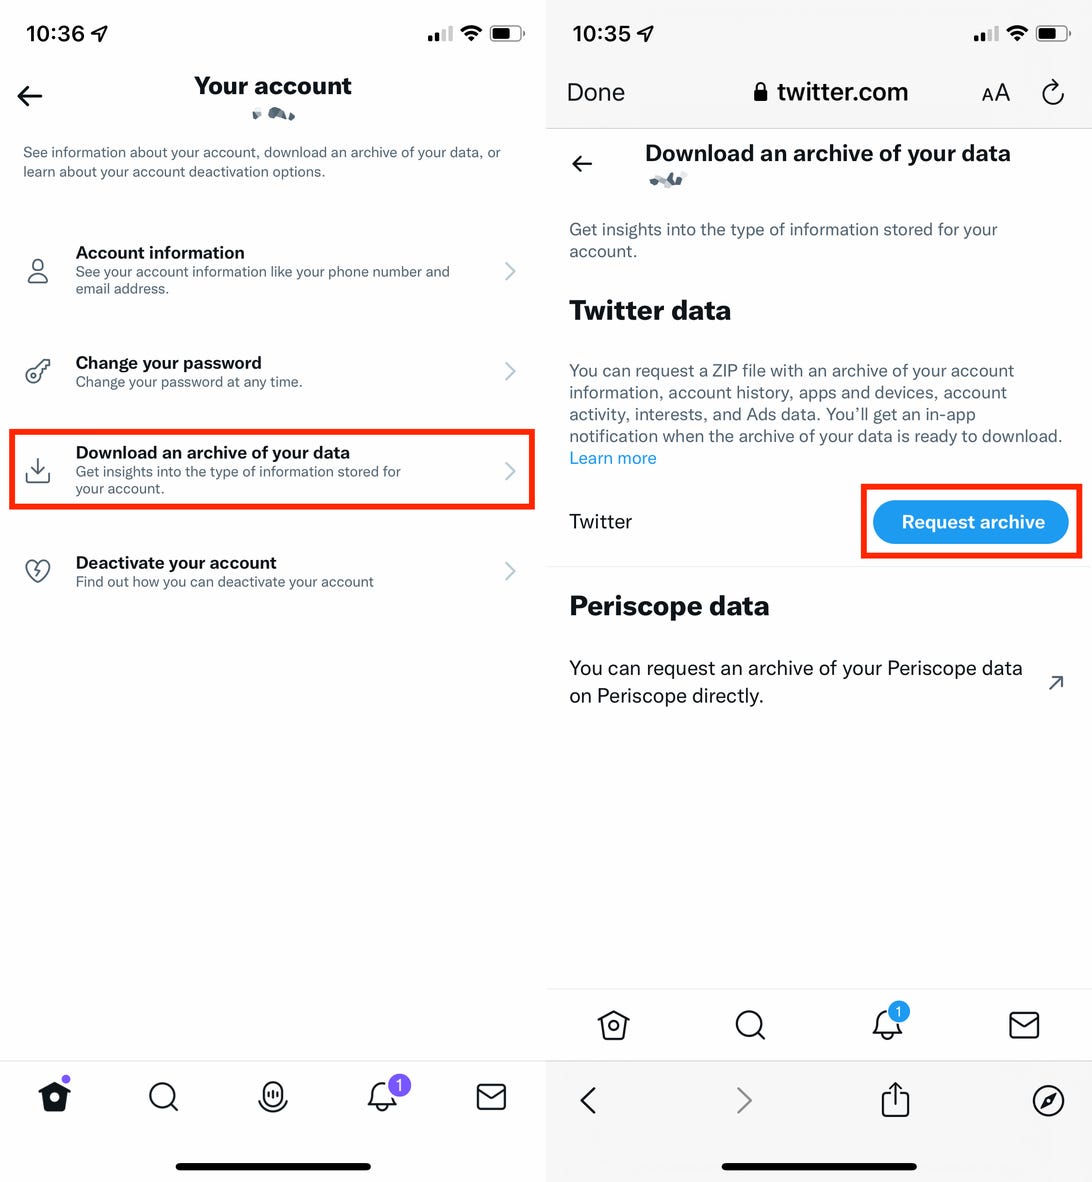 Deleting Your Twitter? Here's How to Archive Your Tweets and DMs Before You Leave
                        Every single thing you've ever tweeted, neatly packaged in a single file for download.